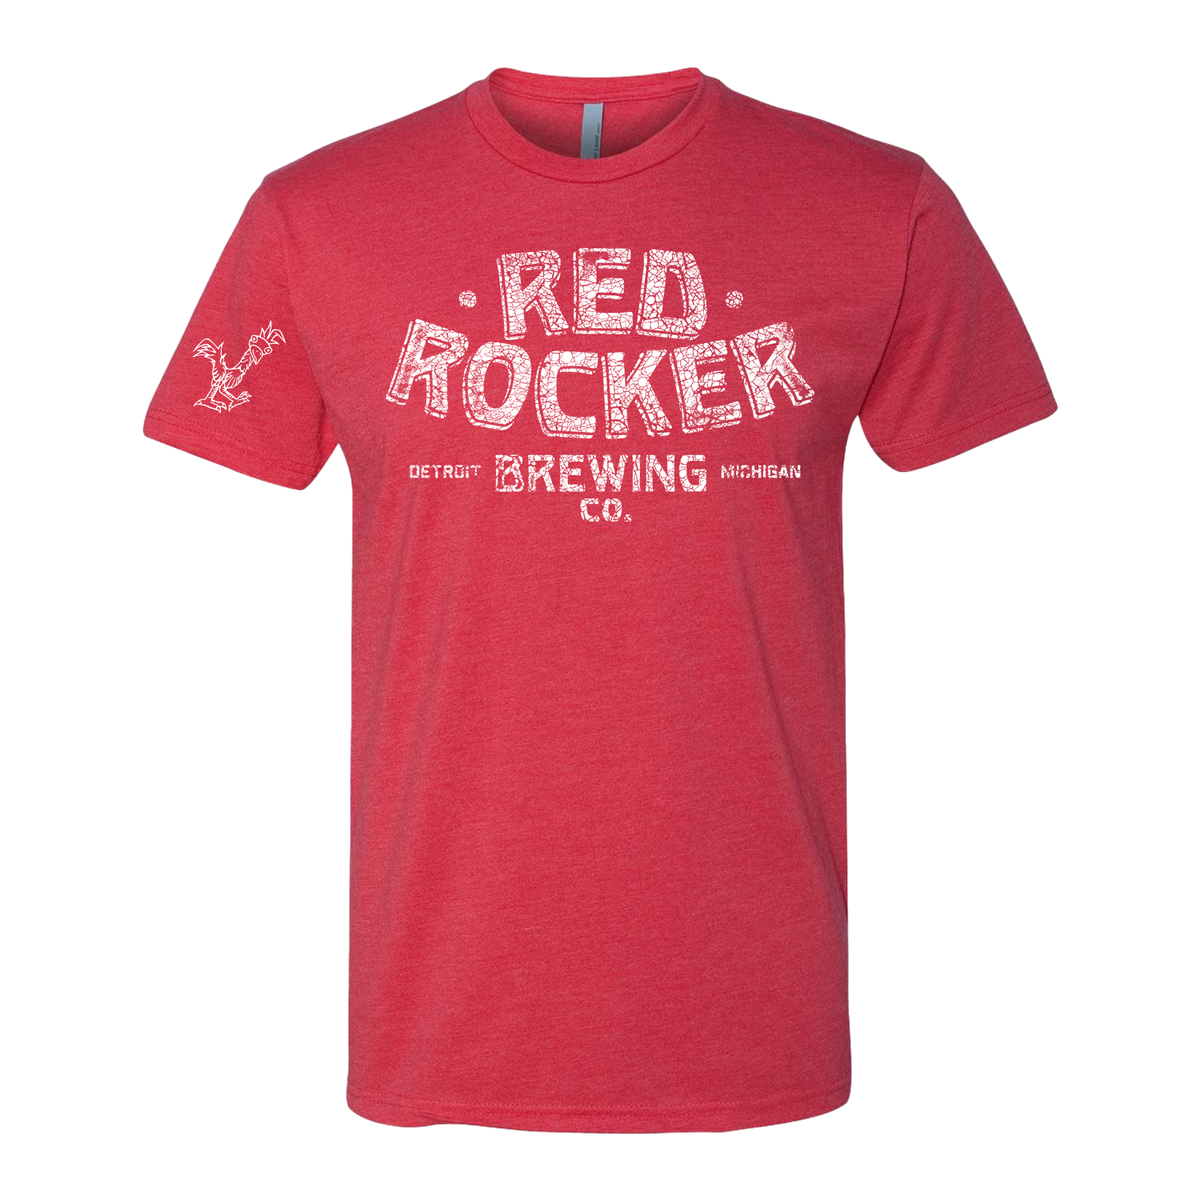 Red Rocker Brewing Company &quot;Script&quot; Tee Red tee w/ White Font